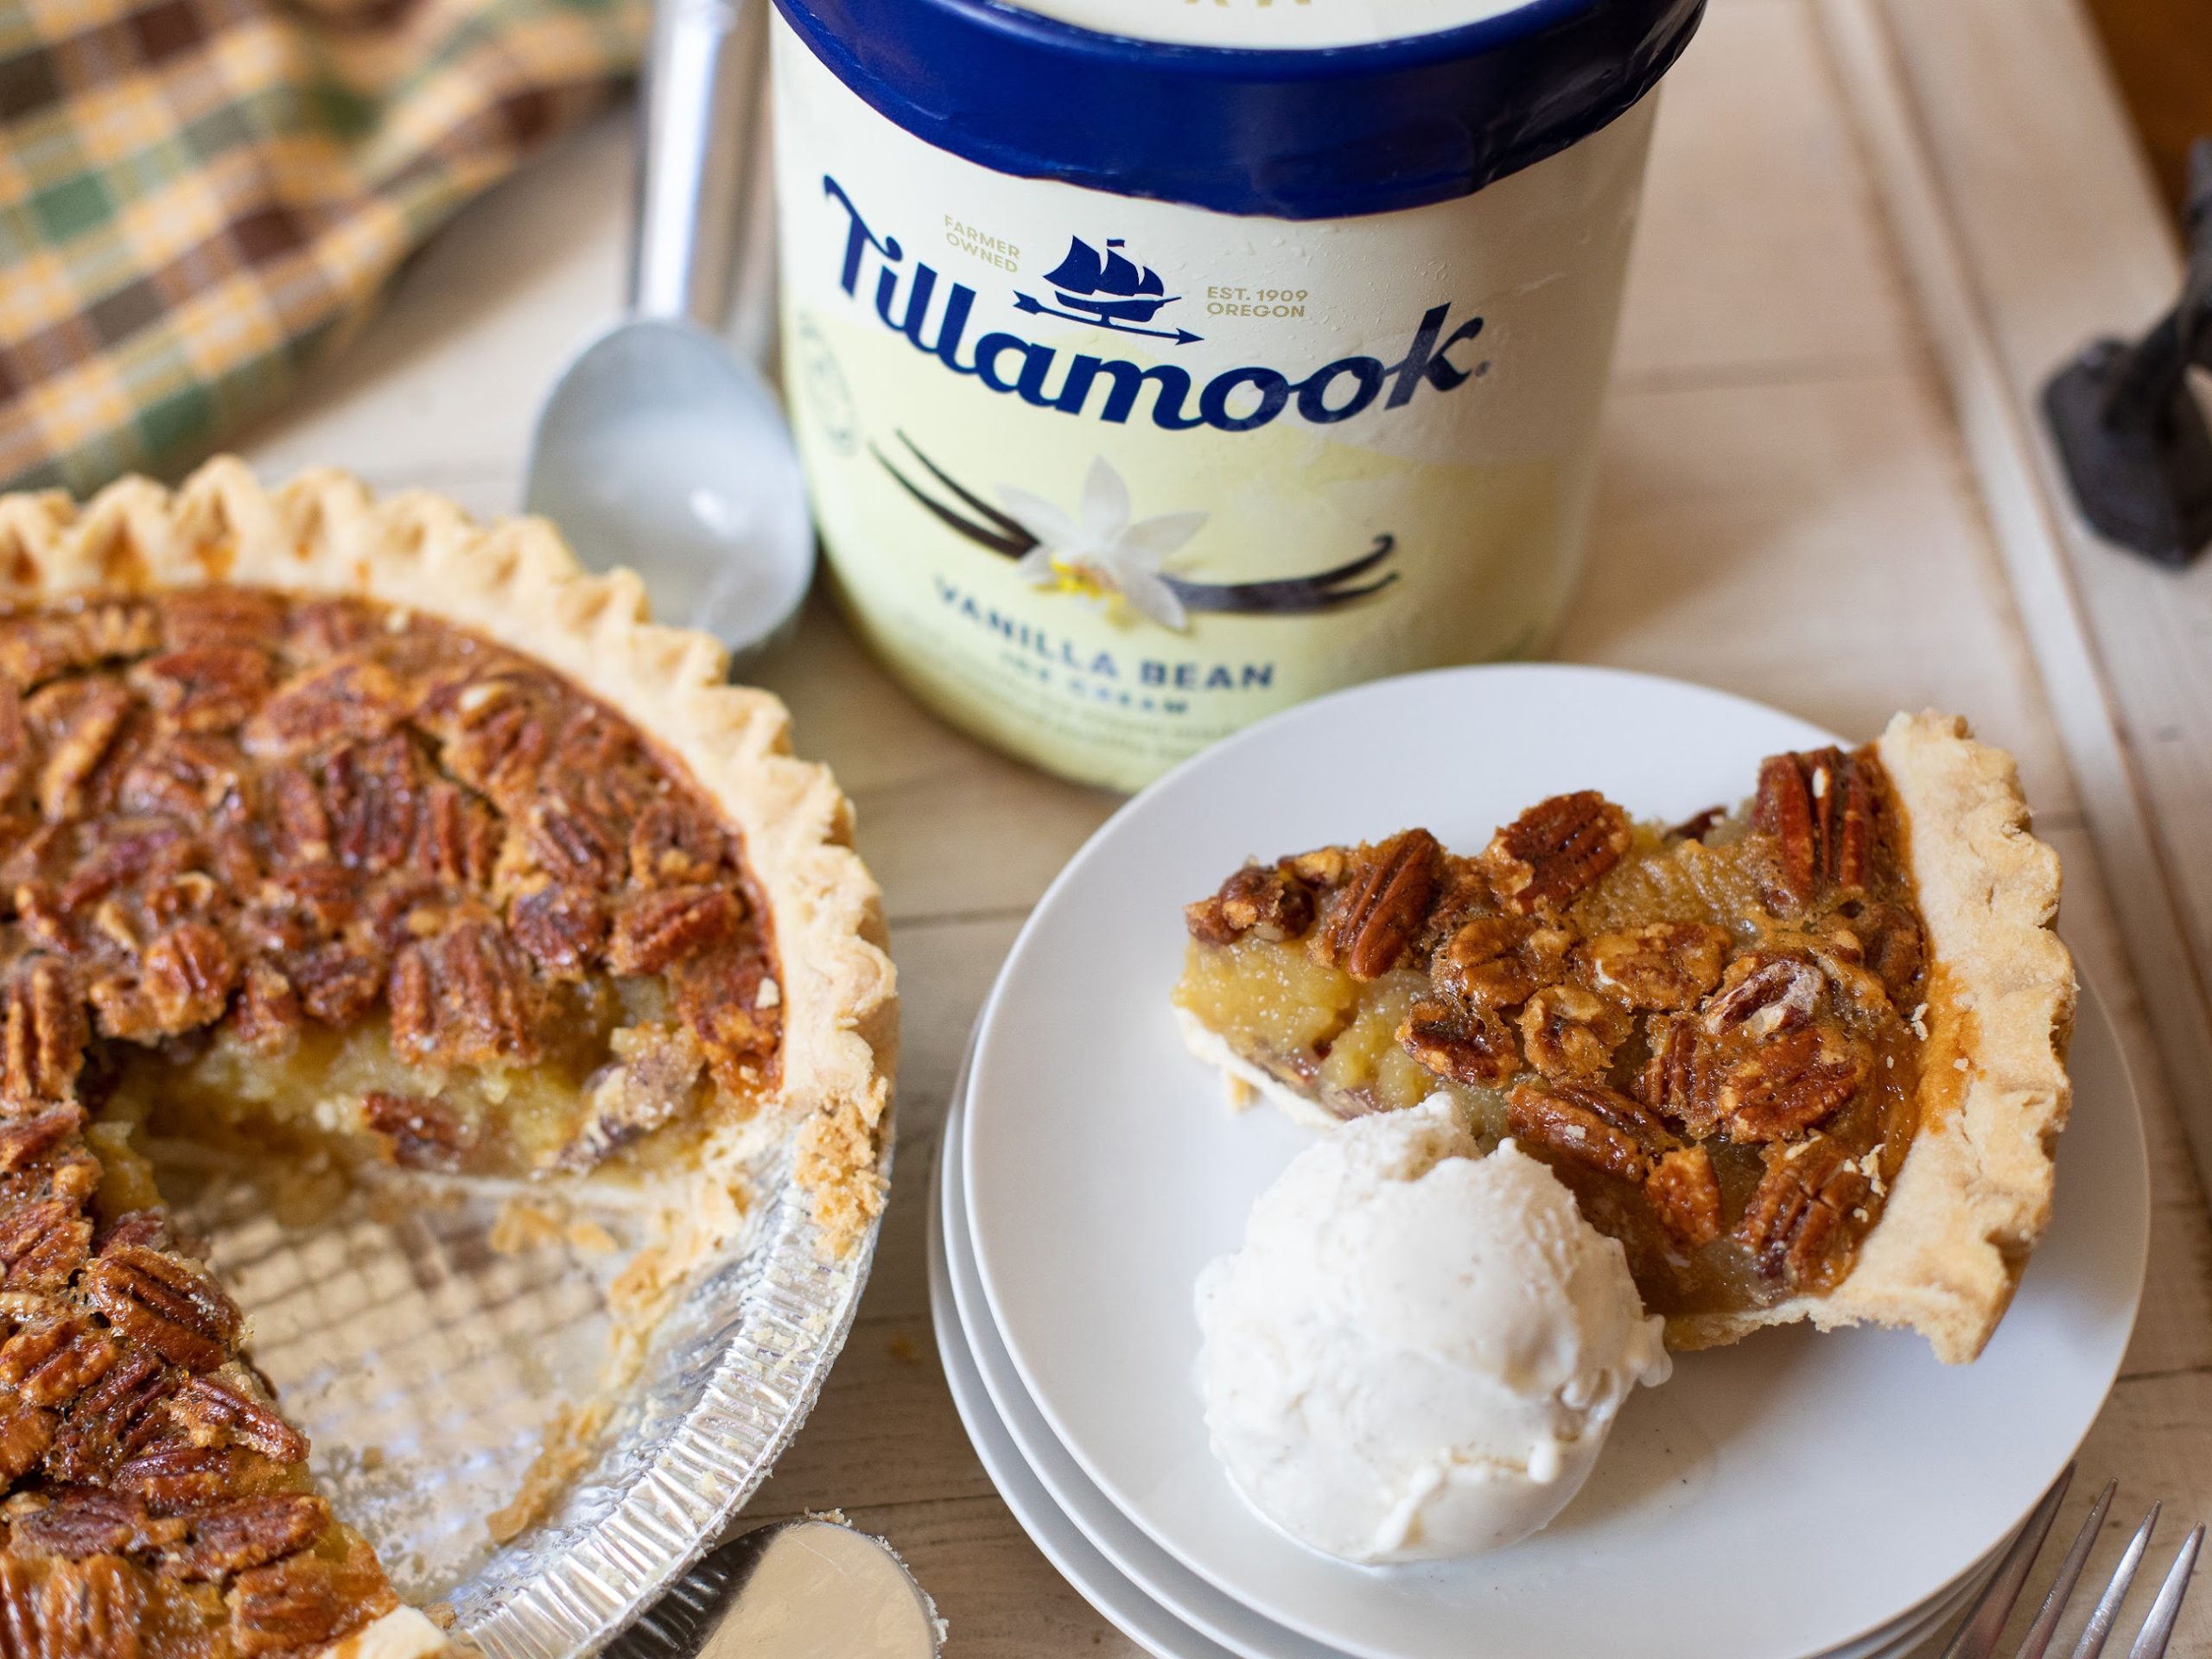 Stock Your Freezer With The Tillamook Ice Cream Sale + Earn A Publix Gift Card! on I Heart Publix